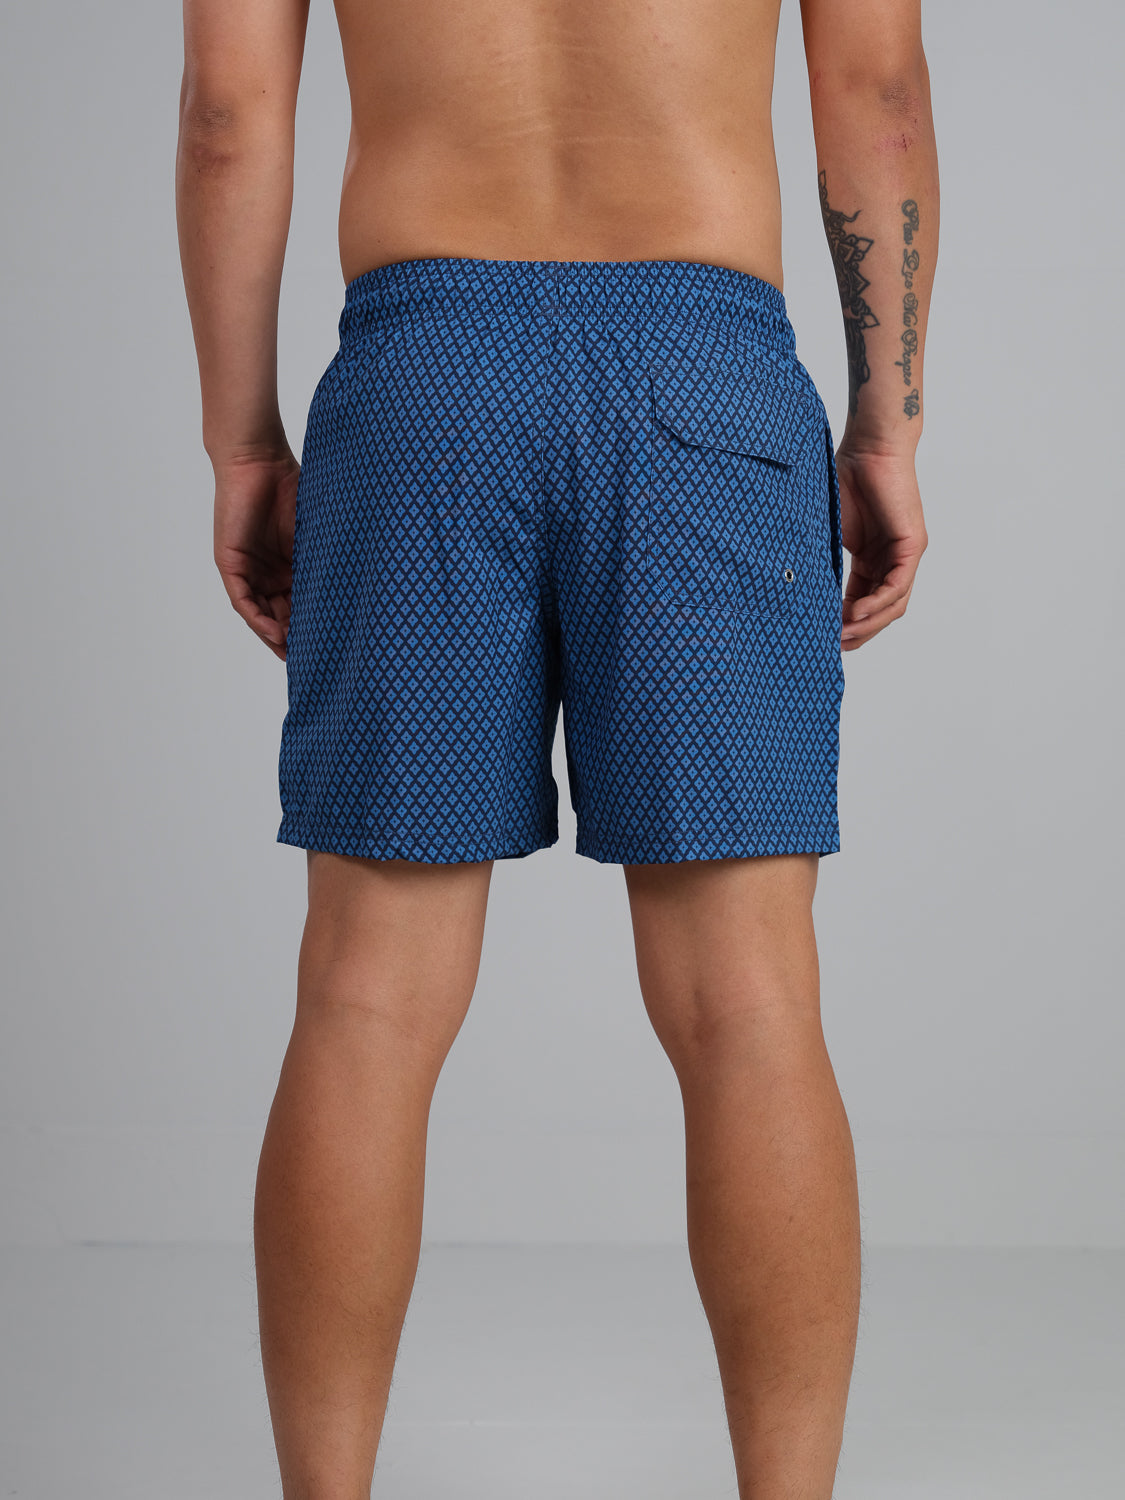 Stars Printed Swim Trunk with Fast Dry and Stretch